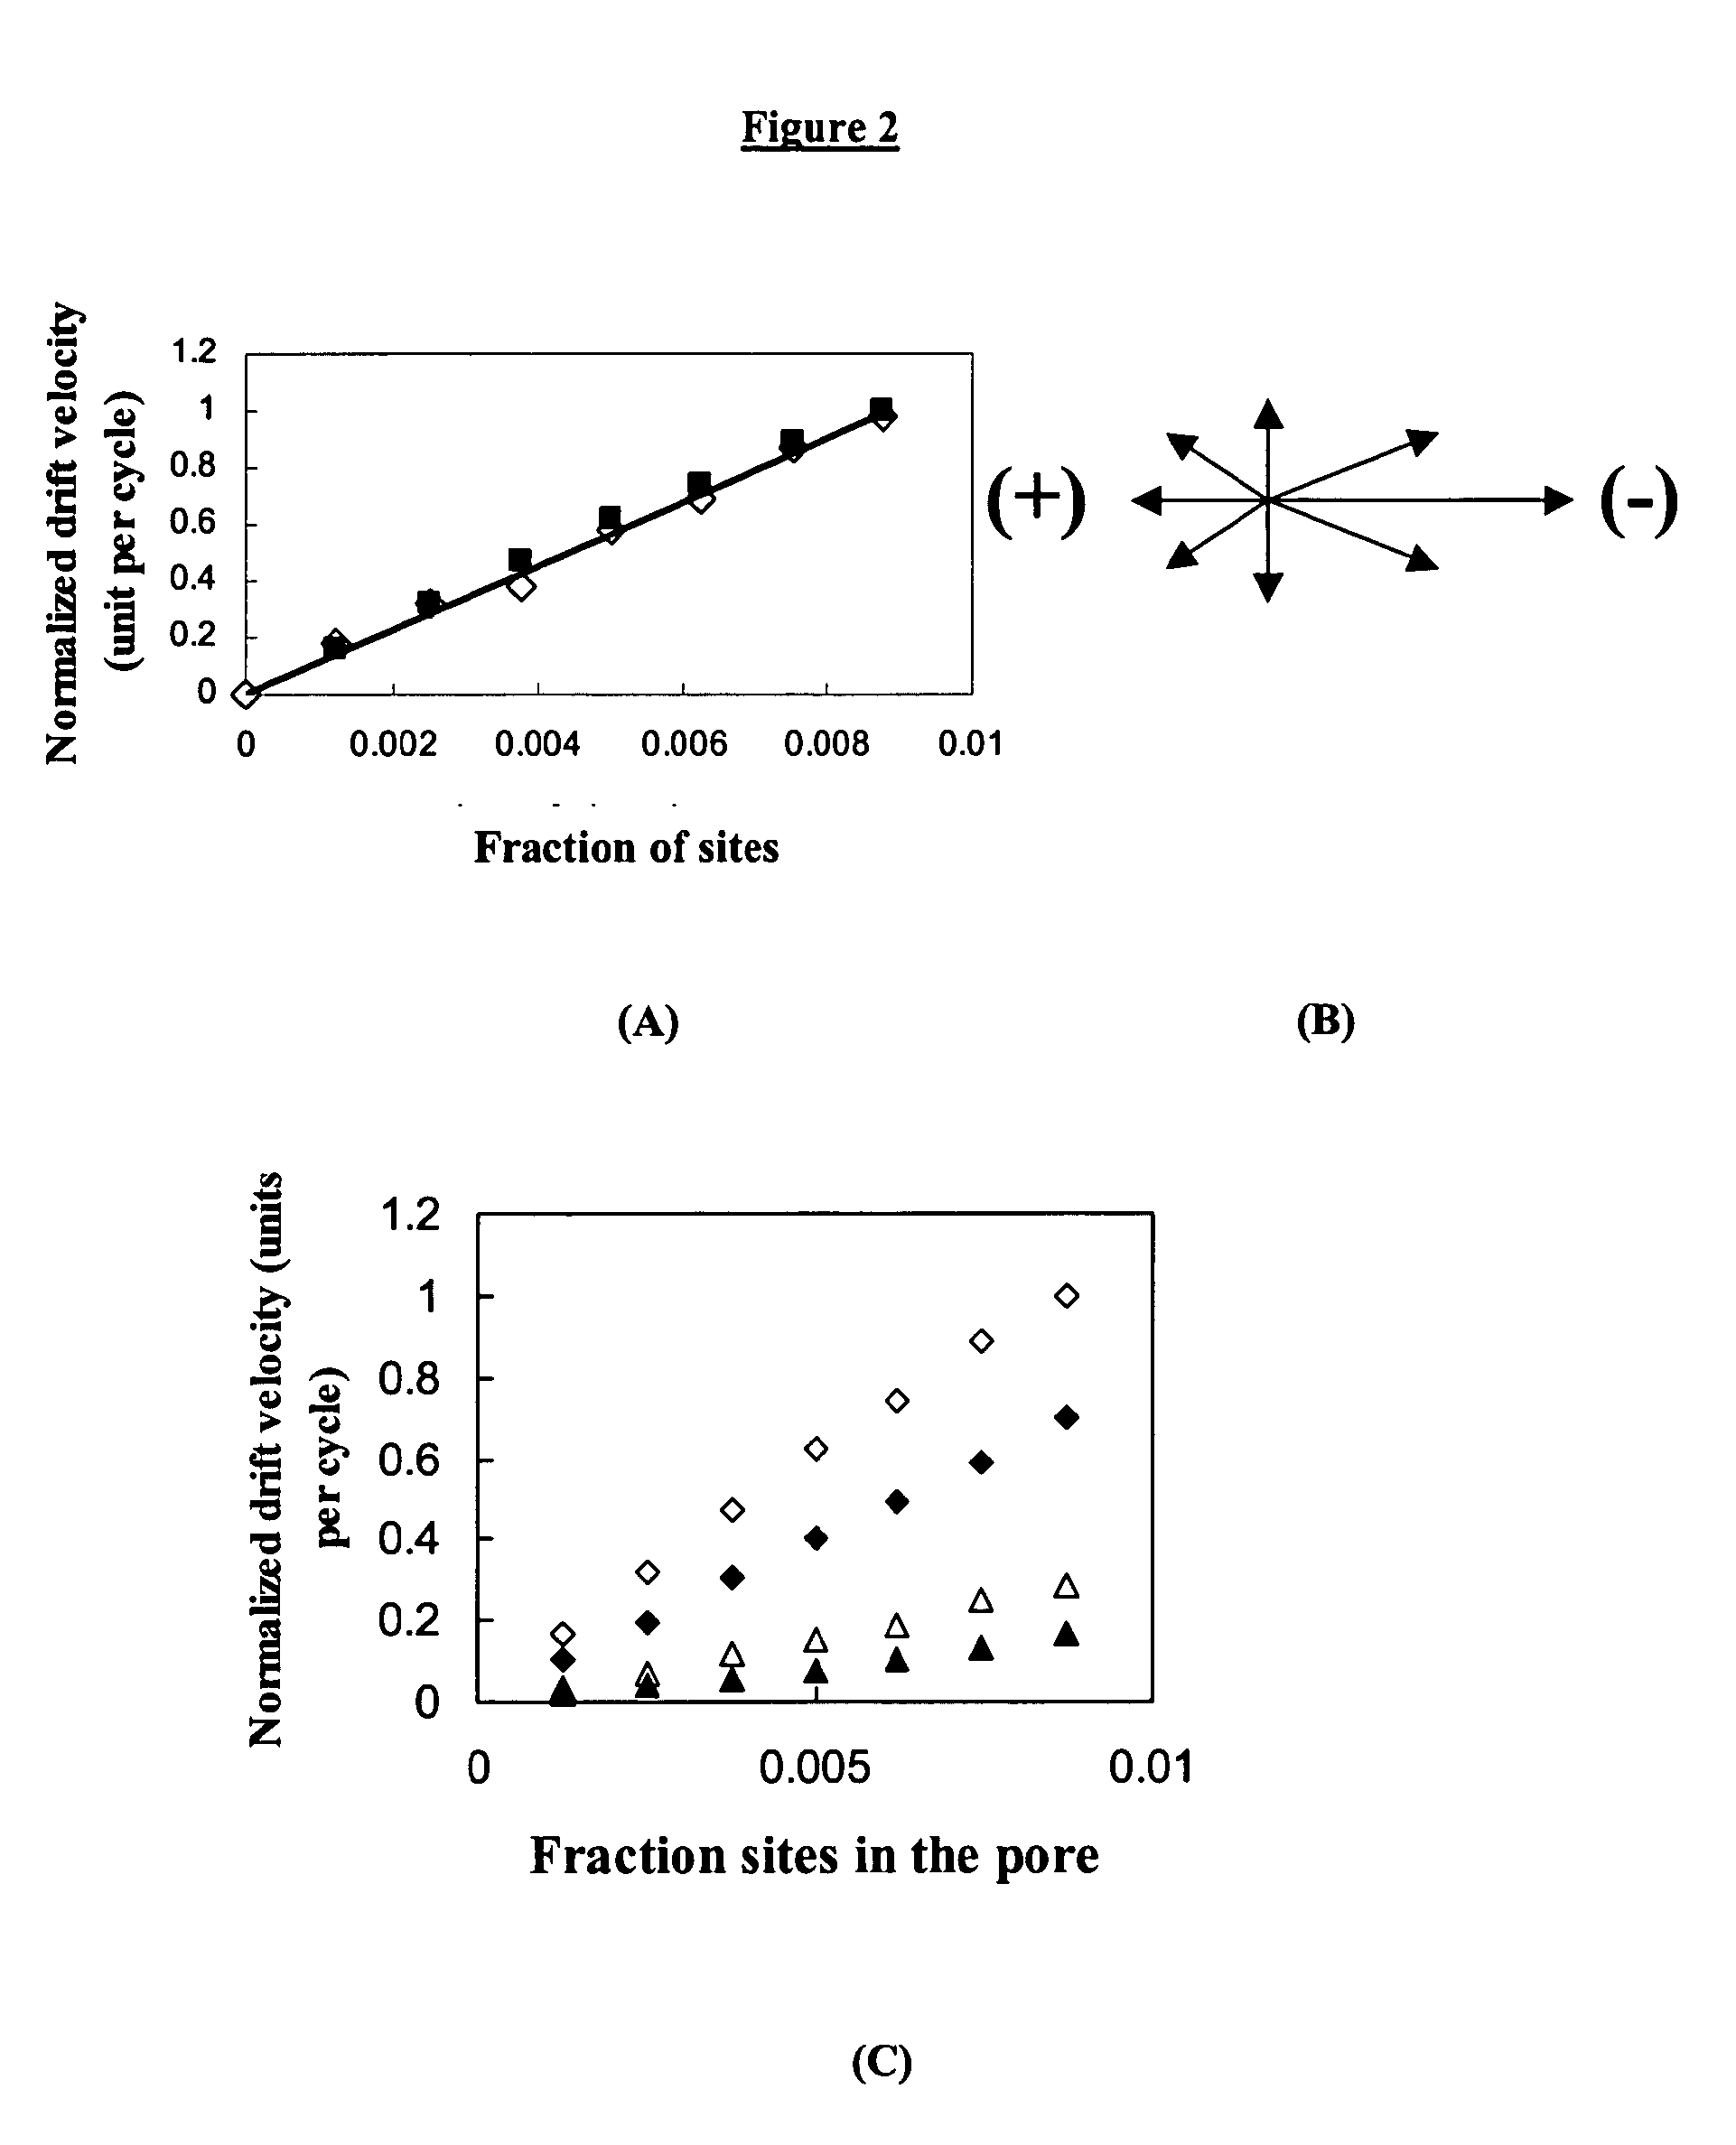 Carbon-Polymer Electrochemical Systems and Methods of Fabricating Them Using Layer-by-Layer Technology